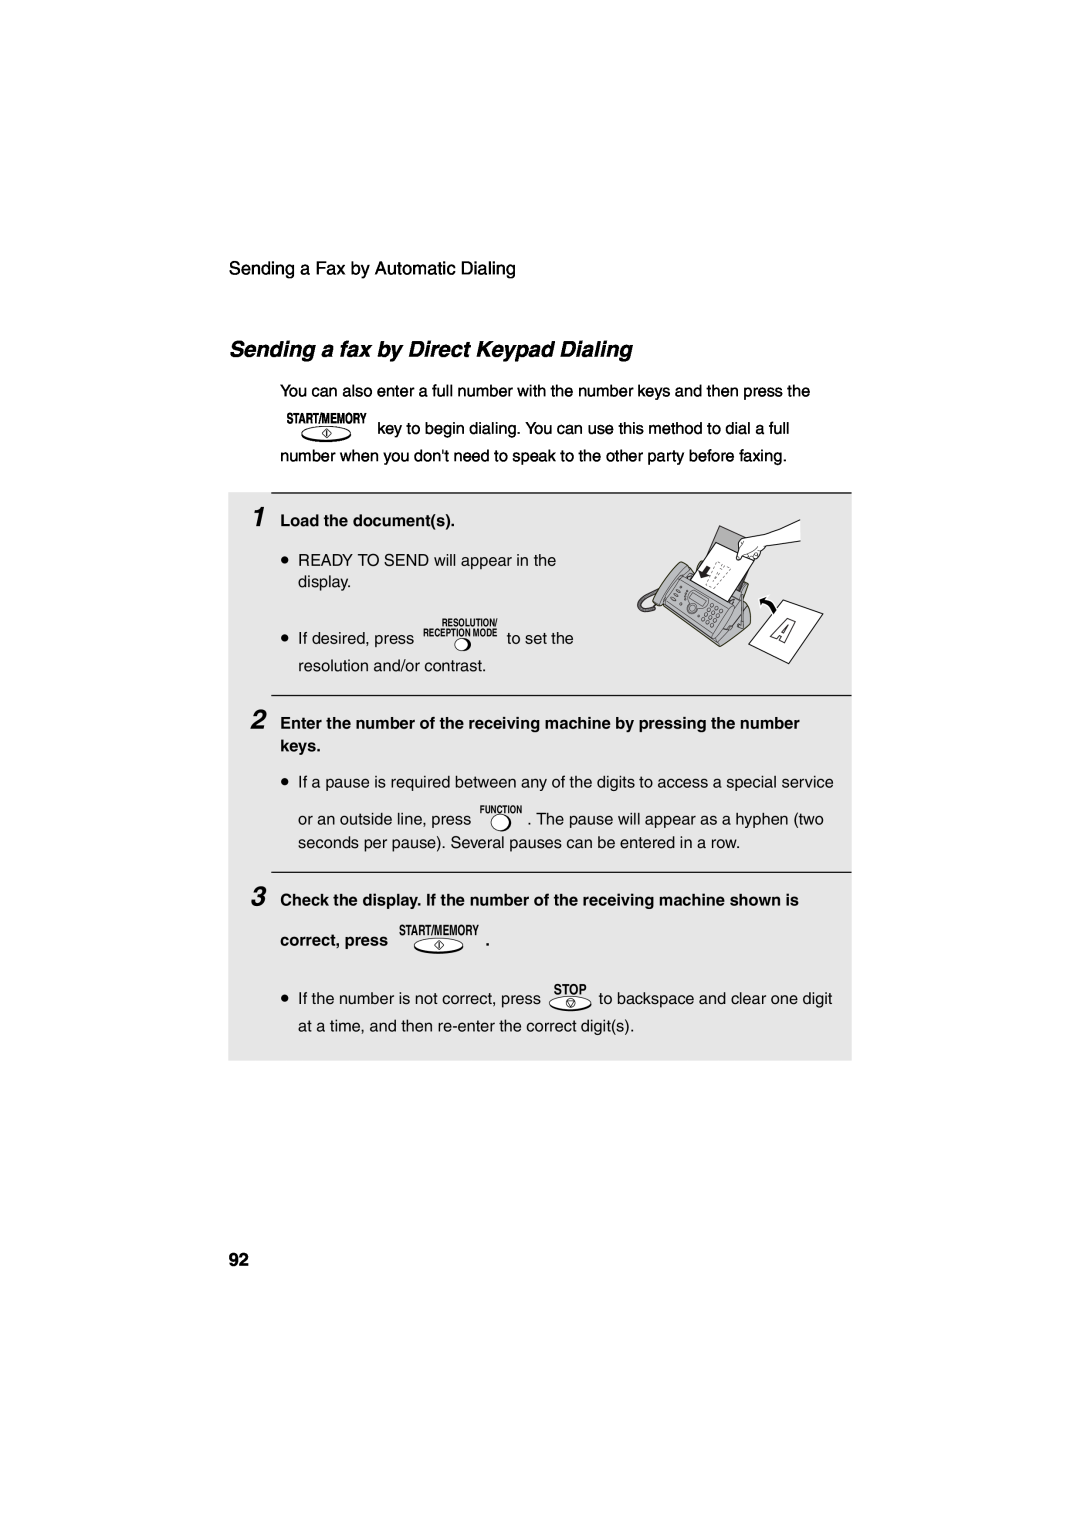 Sharp UX-CD600 operation manual Sending a fax by Direct Keypad Dialing 